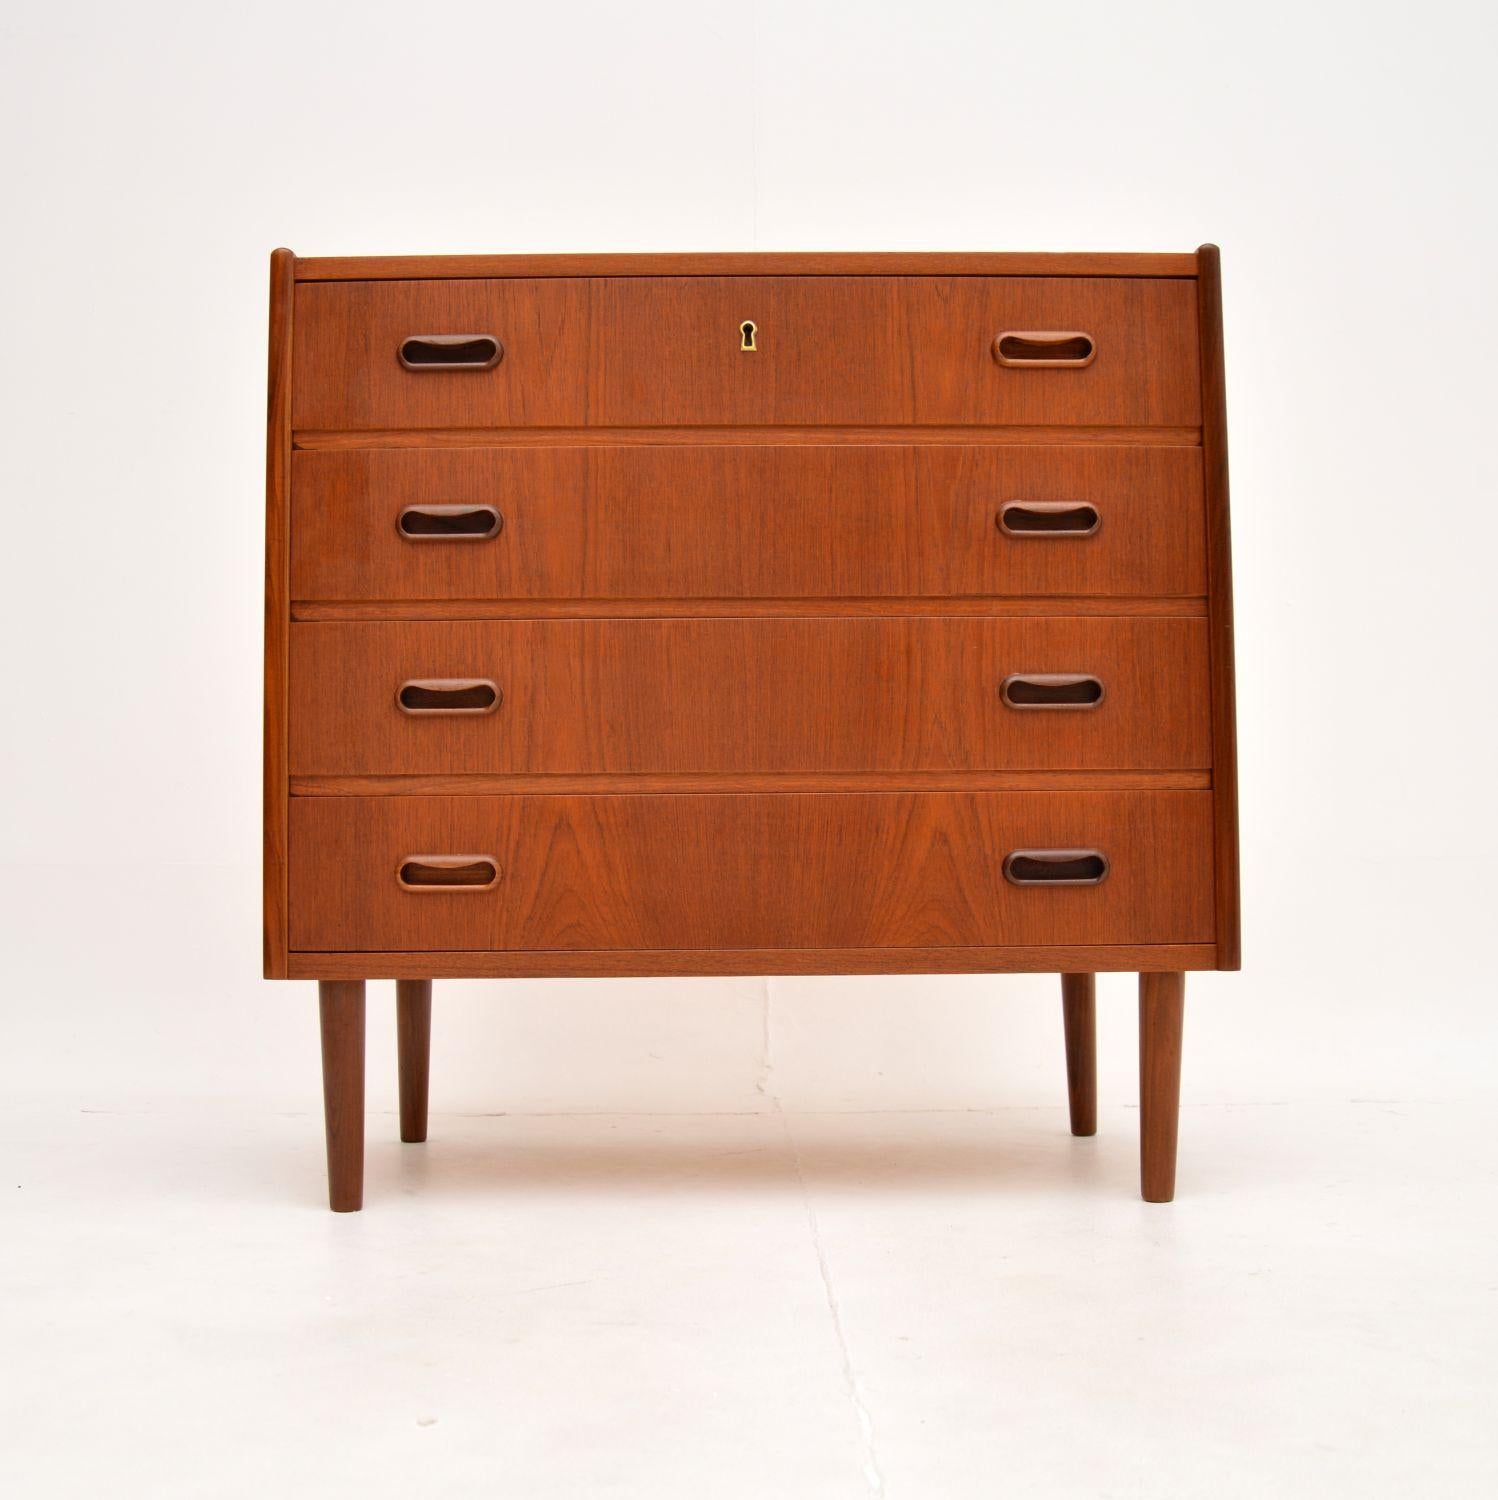 A stylish and very well made Danish vintage teak chest of drawers, dating from the 1960’s.

It is of superb quality, it is very well made and is a useful size. This has a beautiful, sleek design, not taking up too much room yet offering plenty of